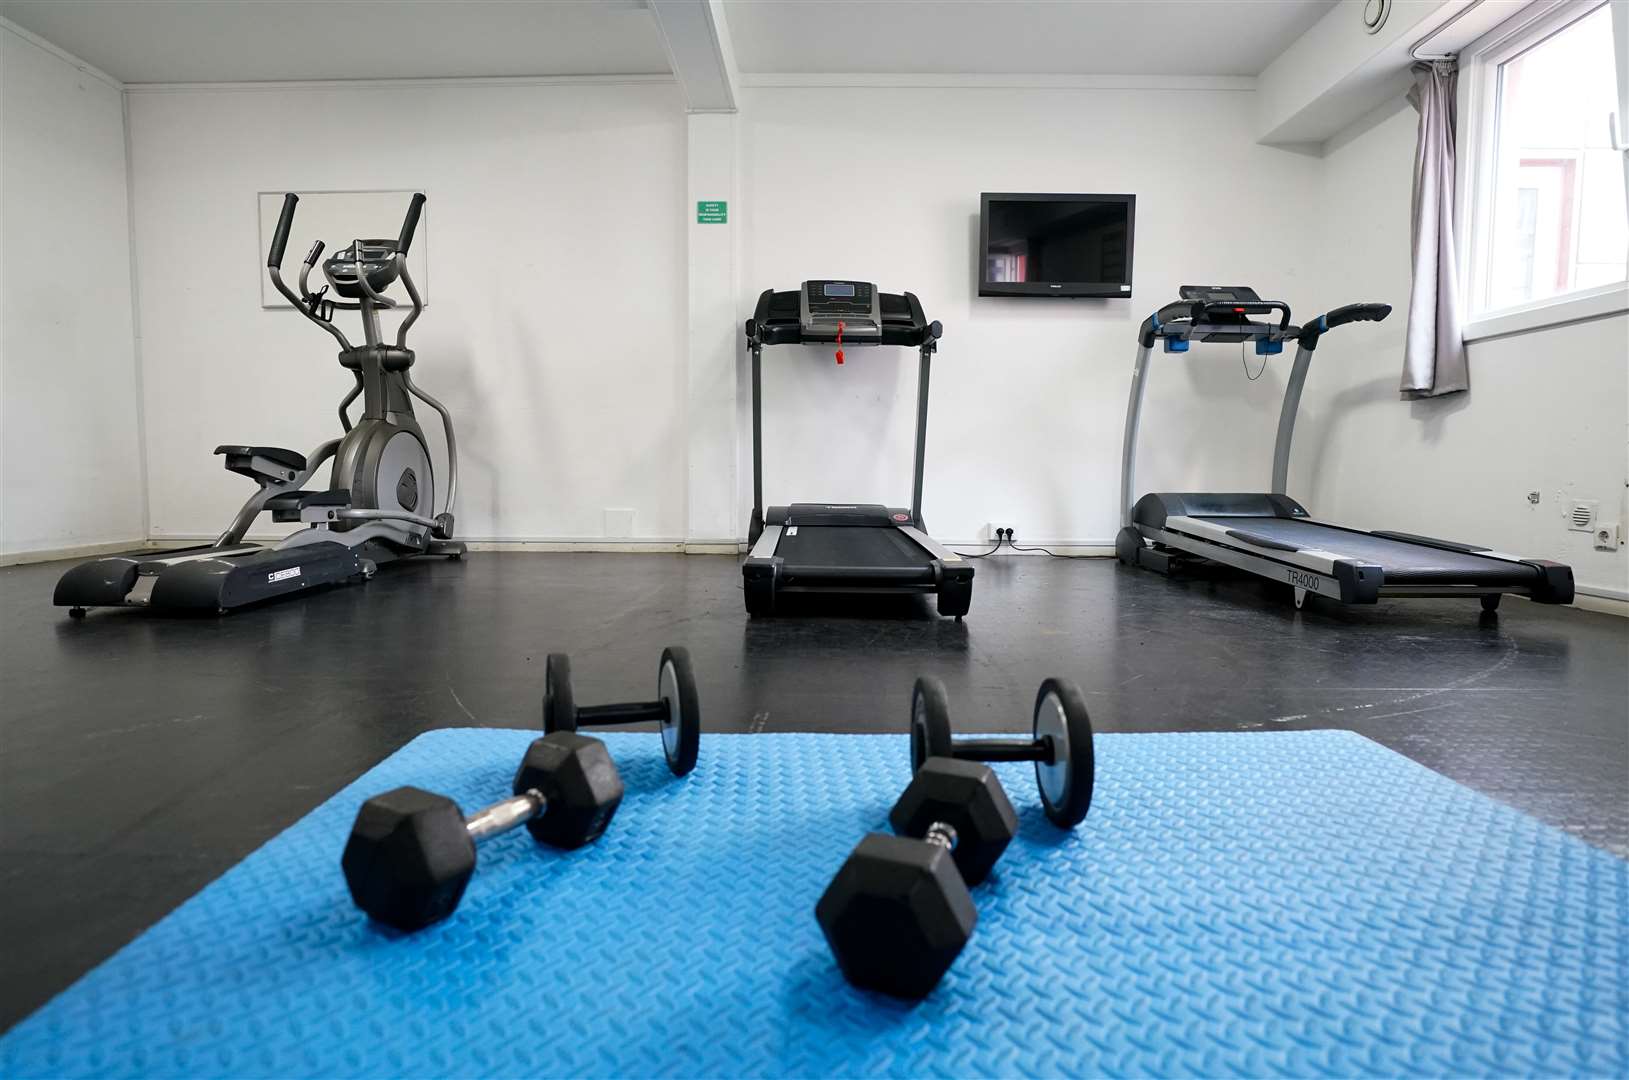 Migrants will be able to use a gym equipped with treadmills, weights and exercise bikes (Andrew Matthews/PA)